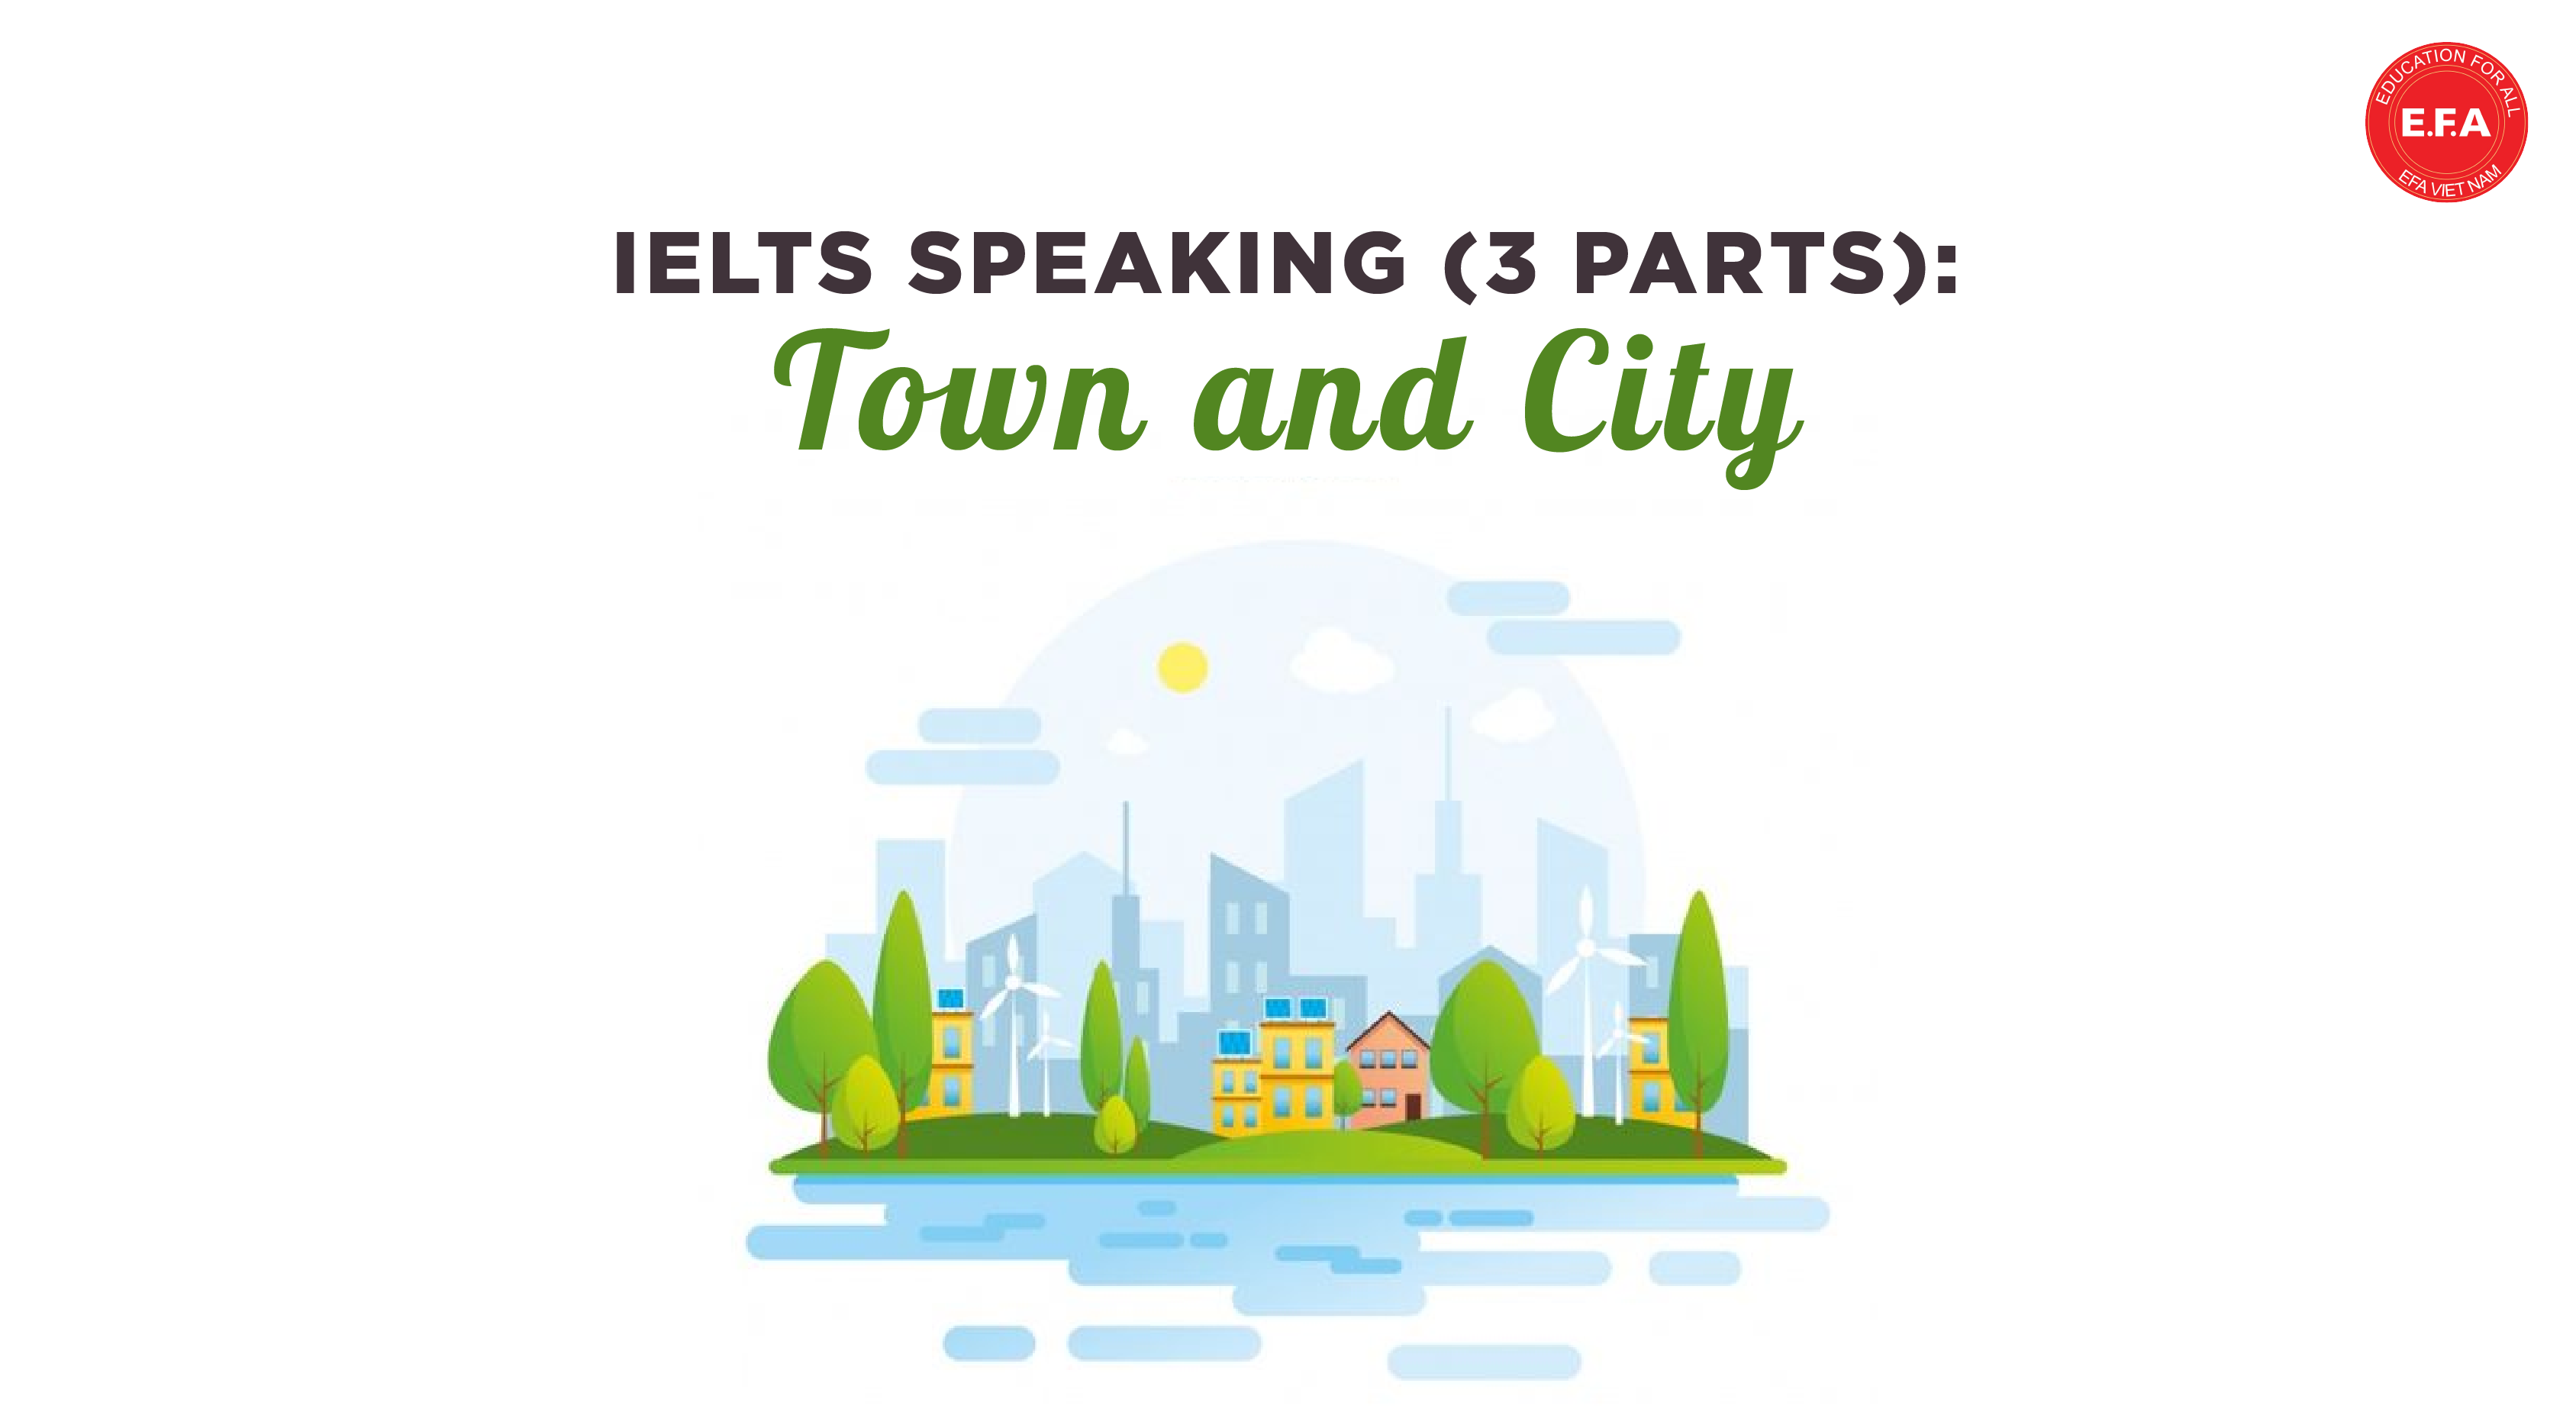 IELTS Speaking 3 parts Town and City